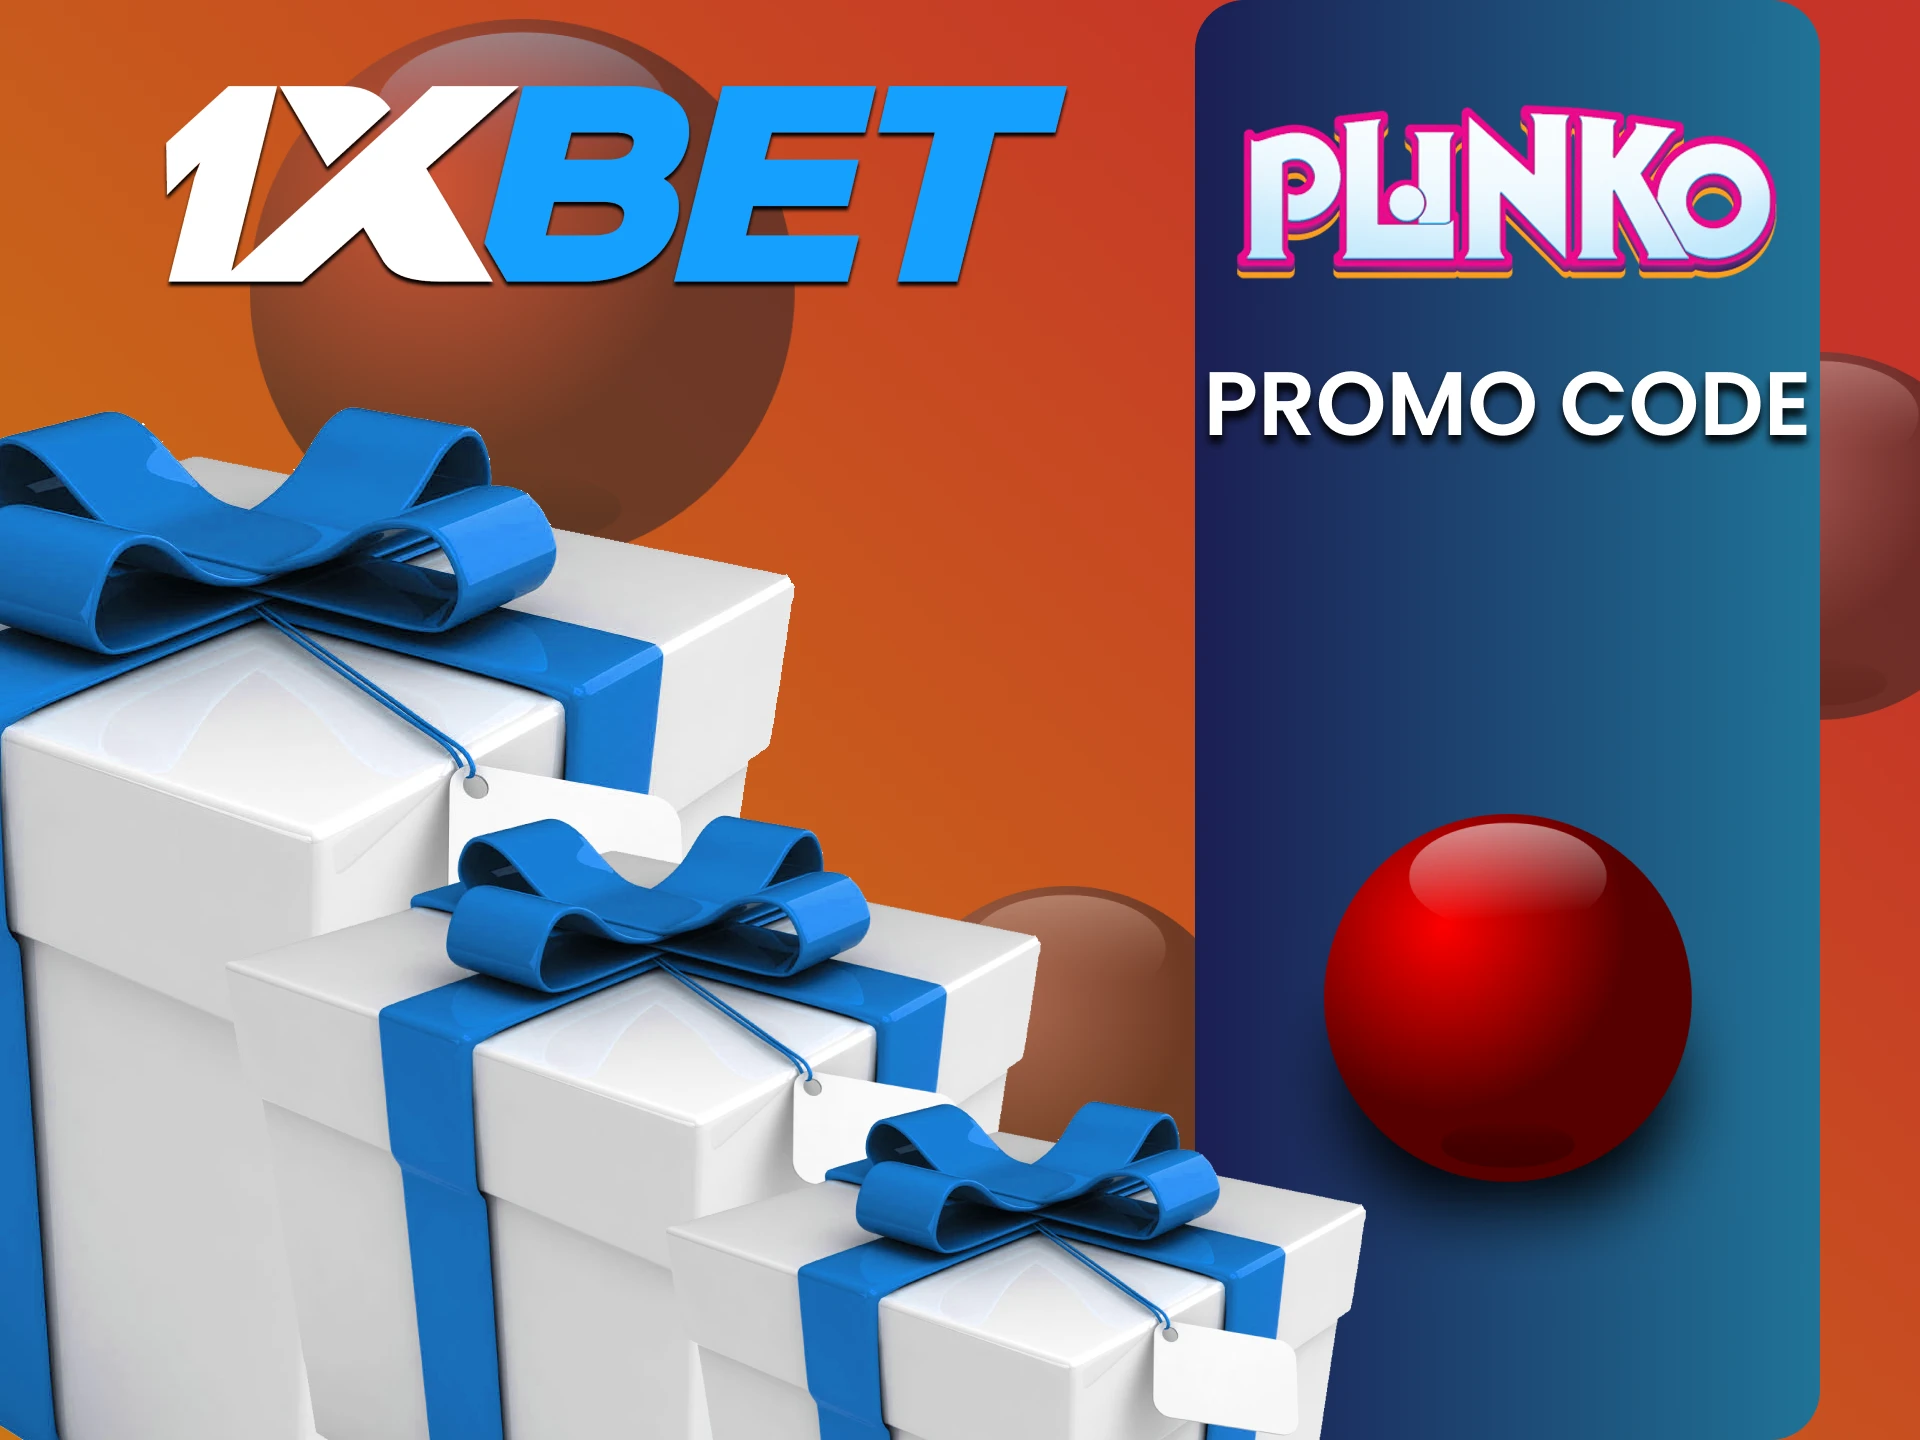 Use the promo code for the game Plinko from 1xbet.